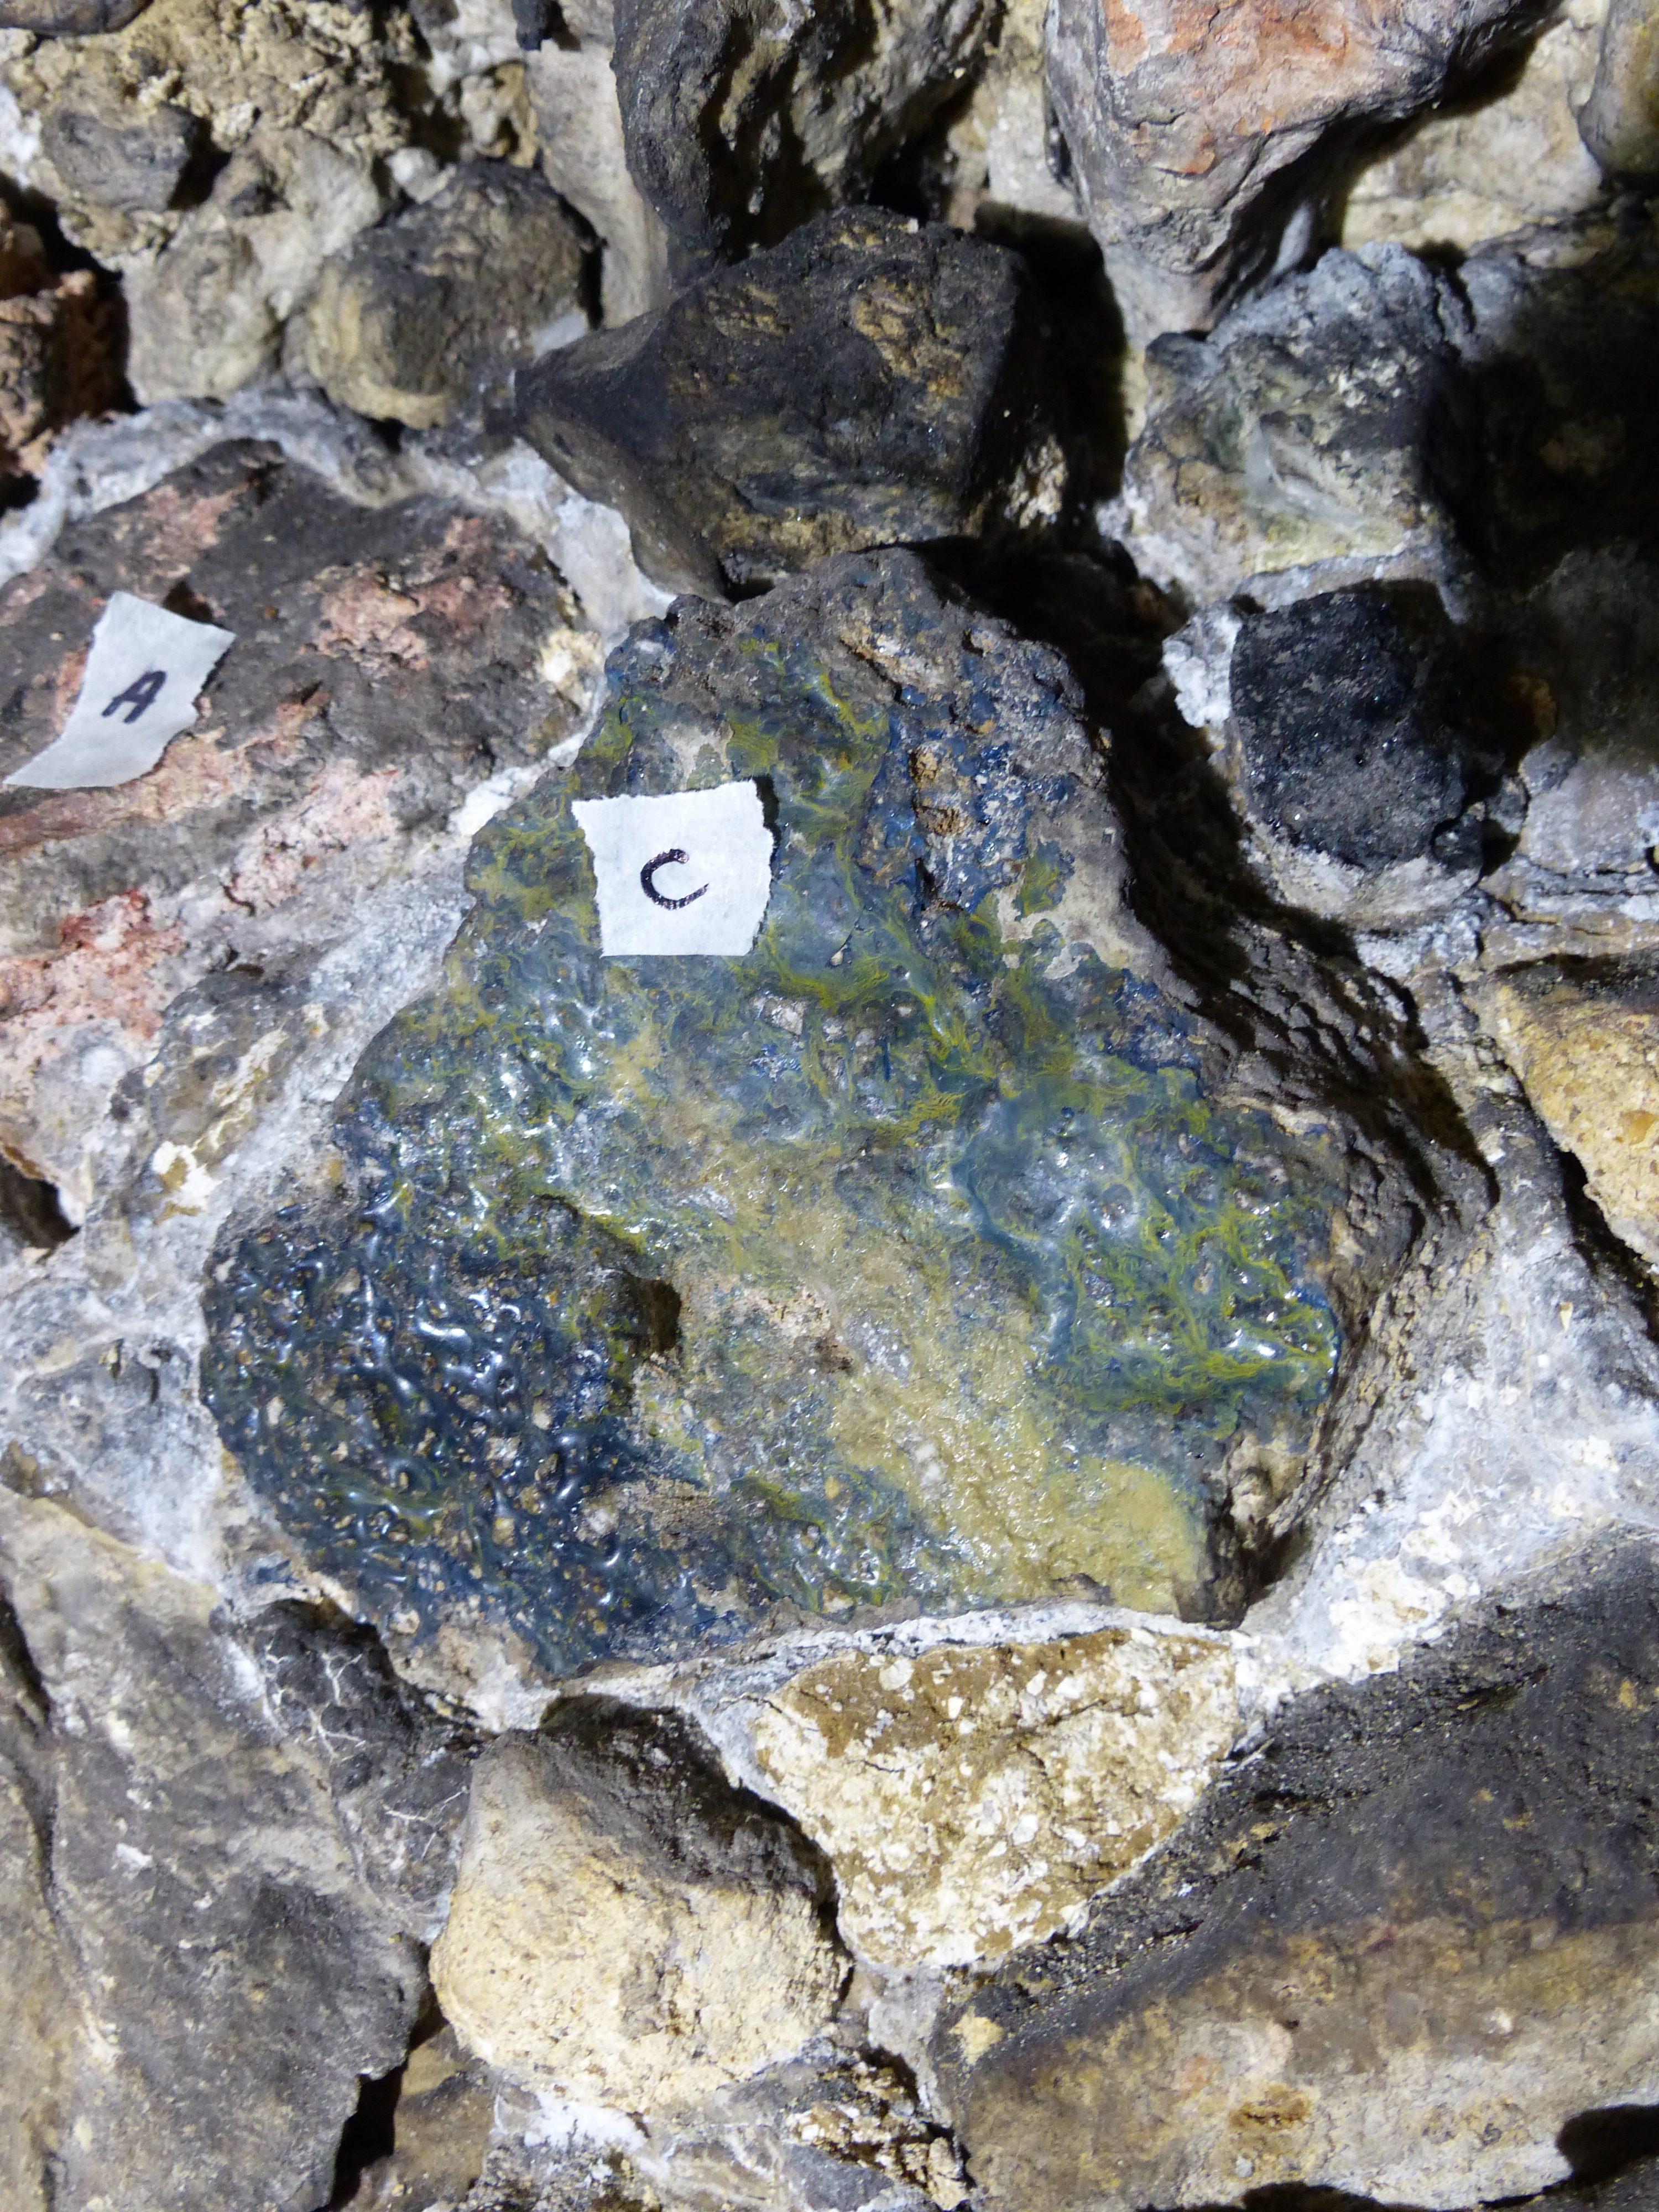 Minerals in the tunnel marked up by a geologist